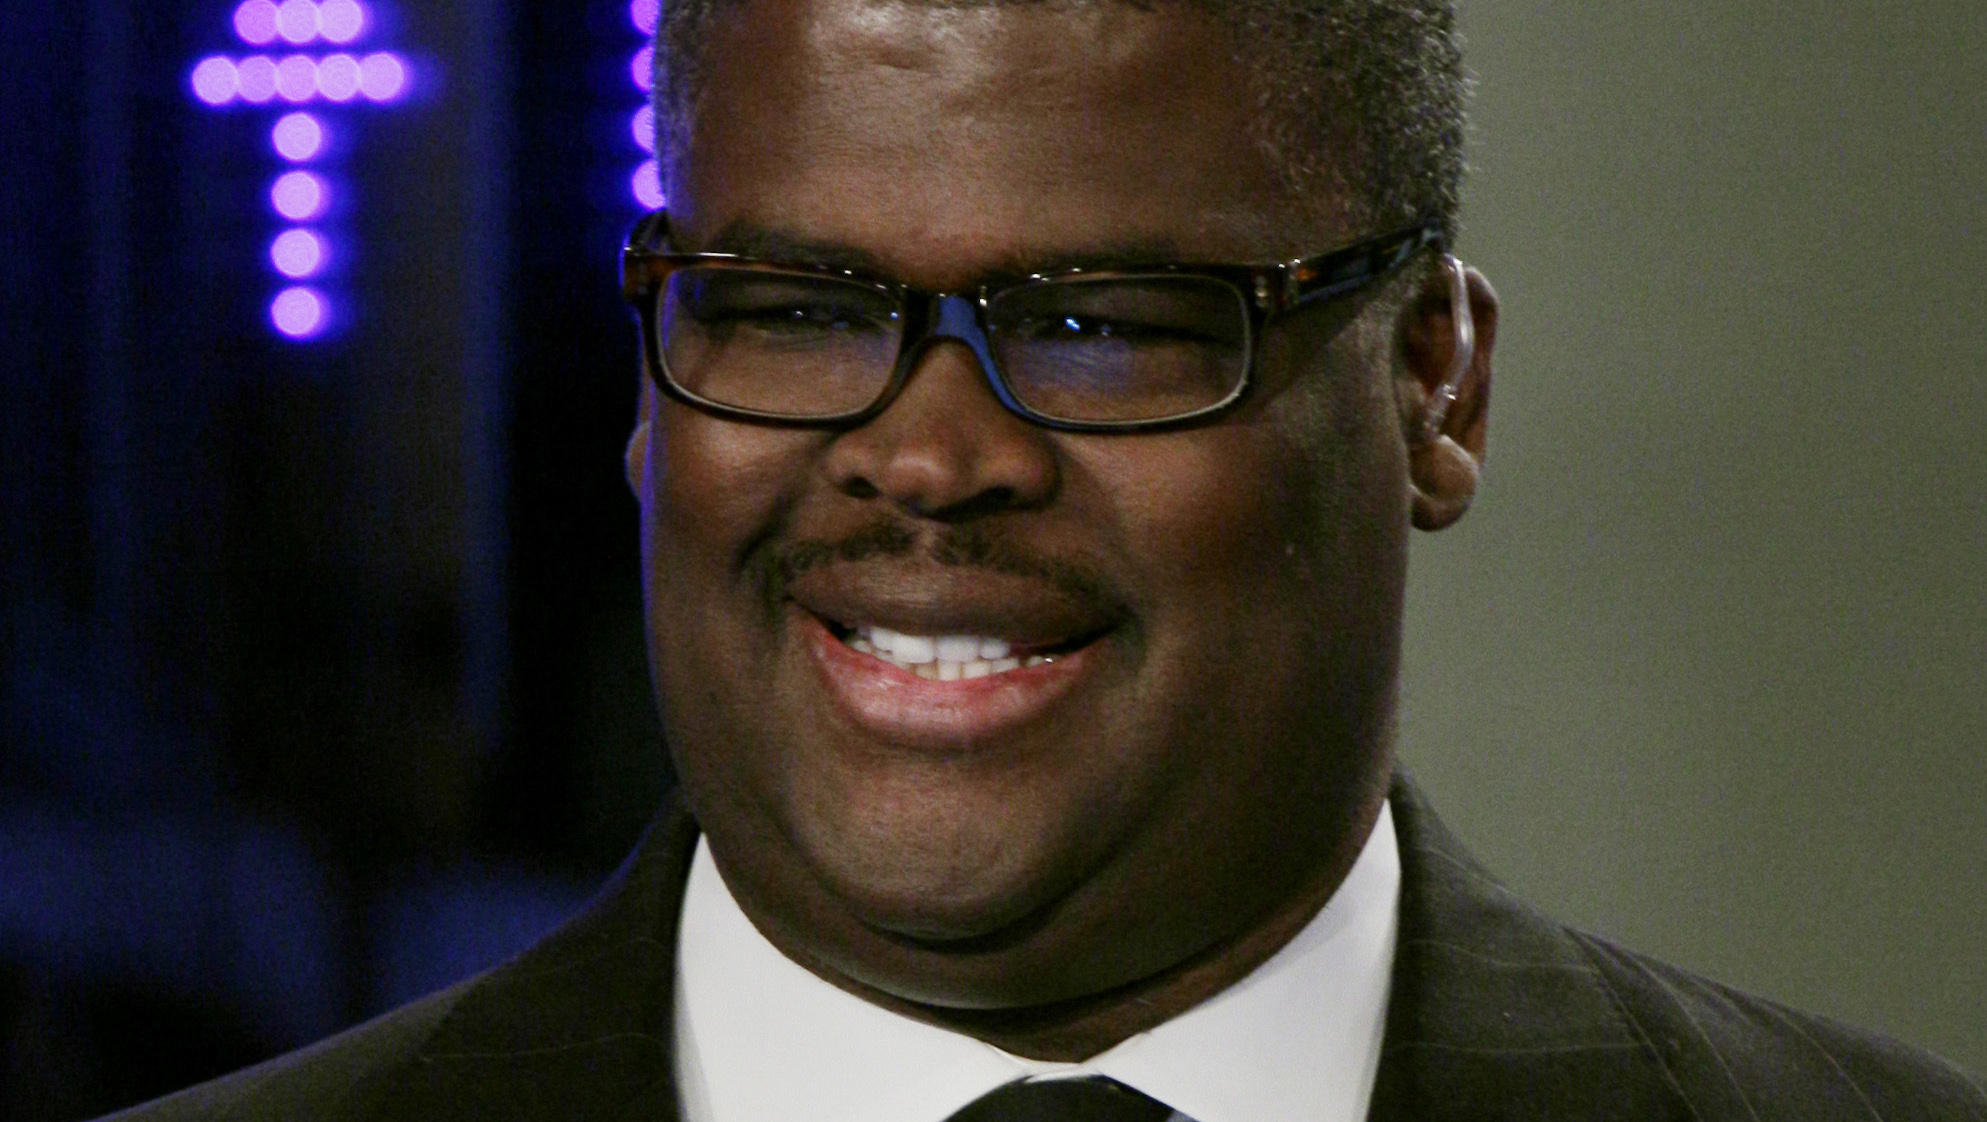 Fox Business host Charles Payne suspended amid sex harassment probe - CBS News